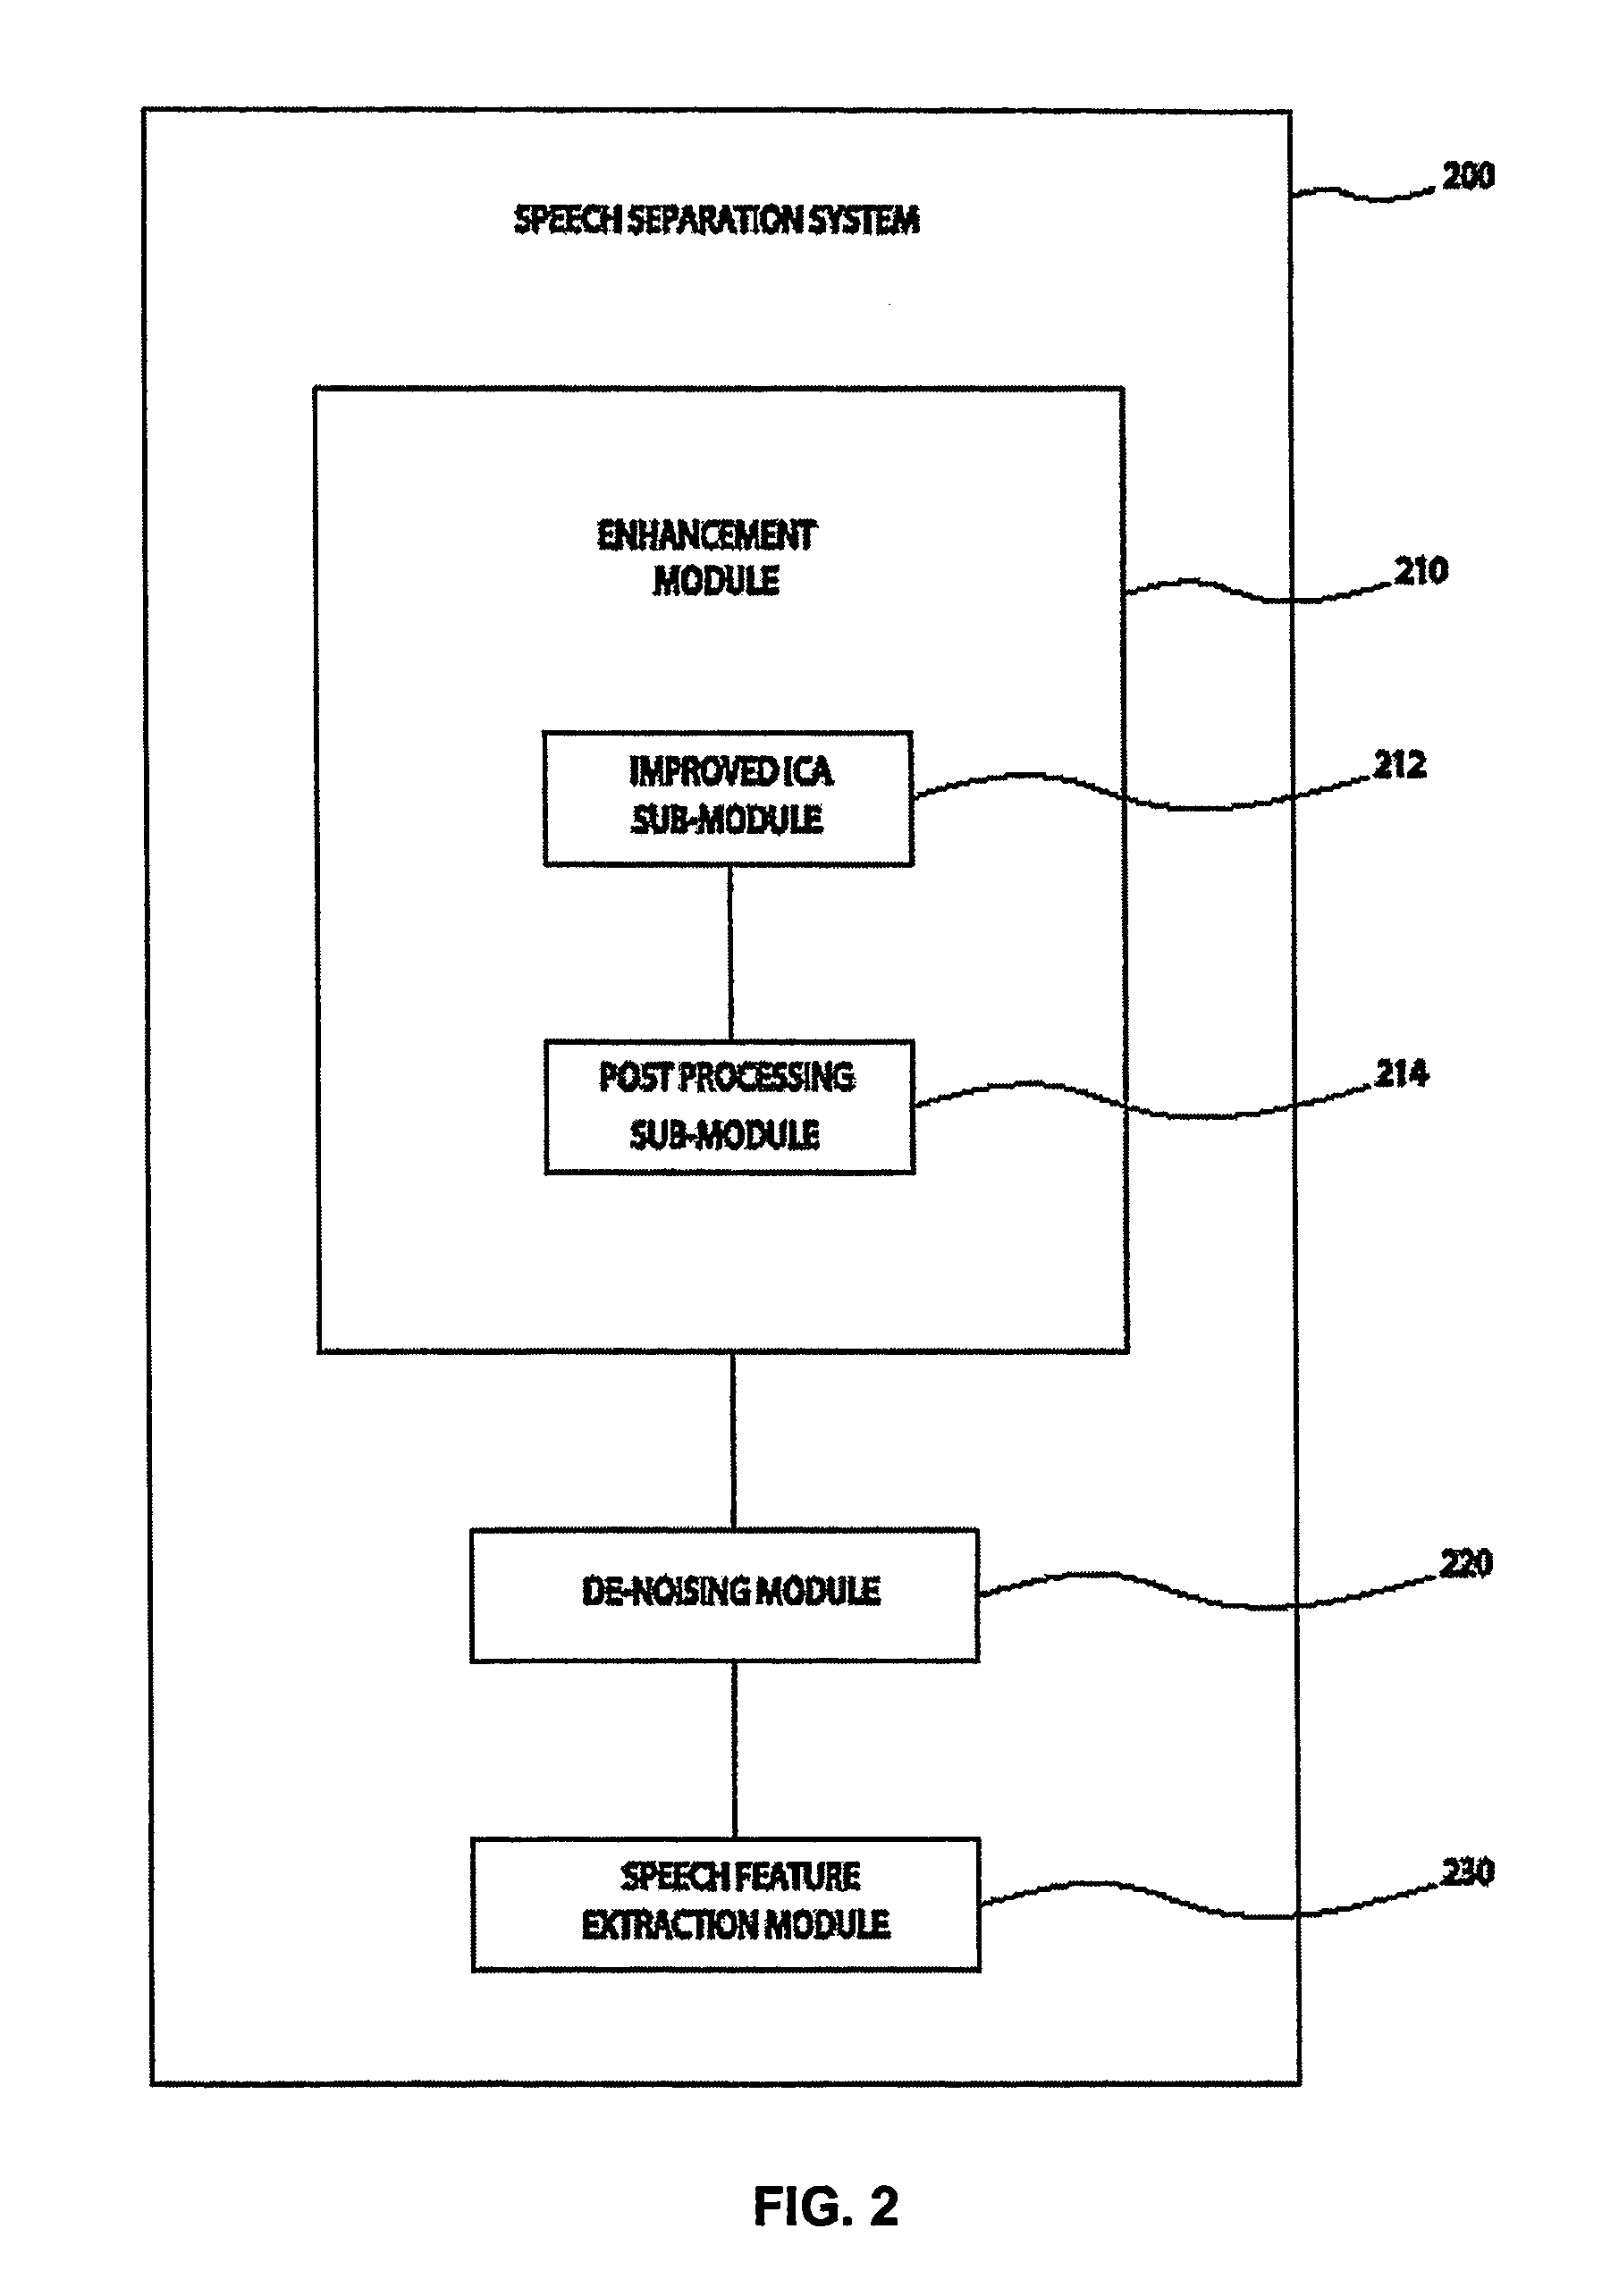 System and method for speech processing using independent component analysis under stability constraints